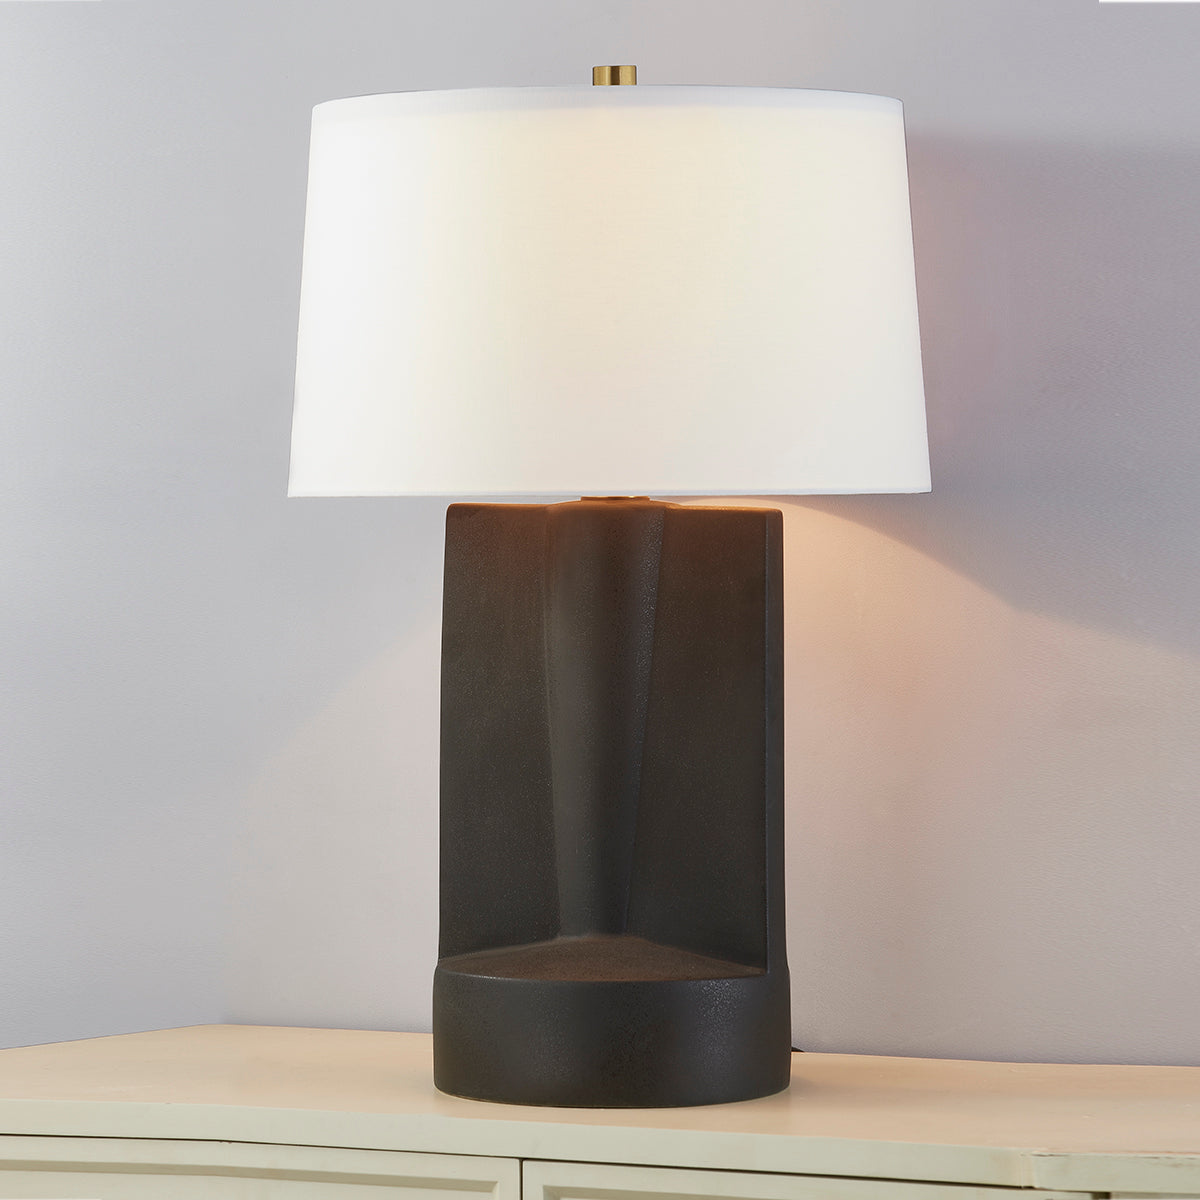 Dark Grey Textured Ceramic Base with Linen White Shade Table Lamp